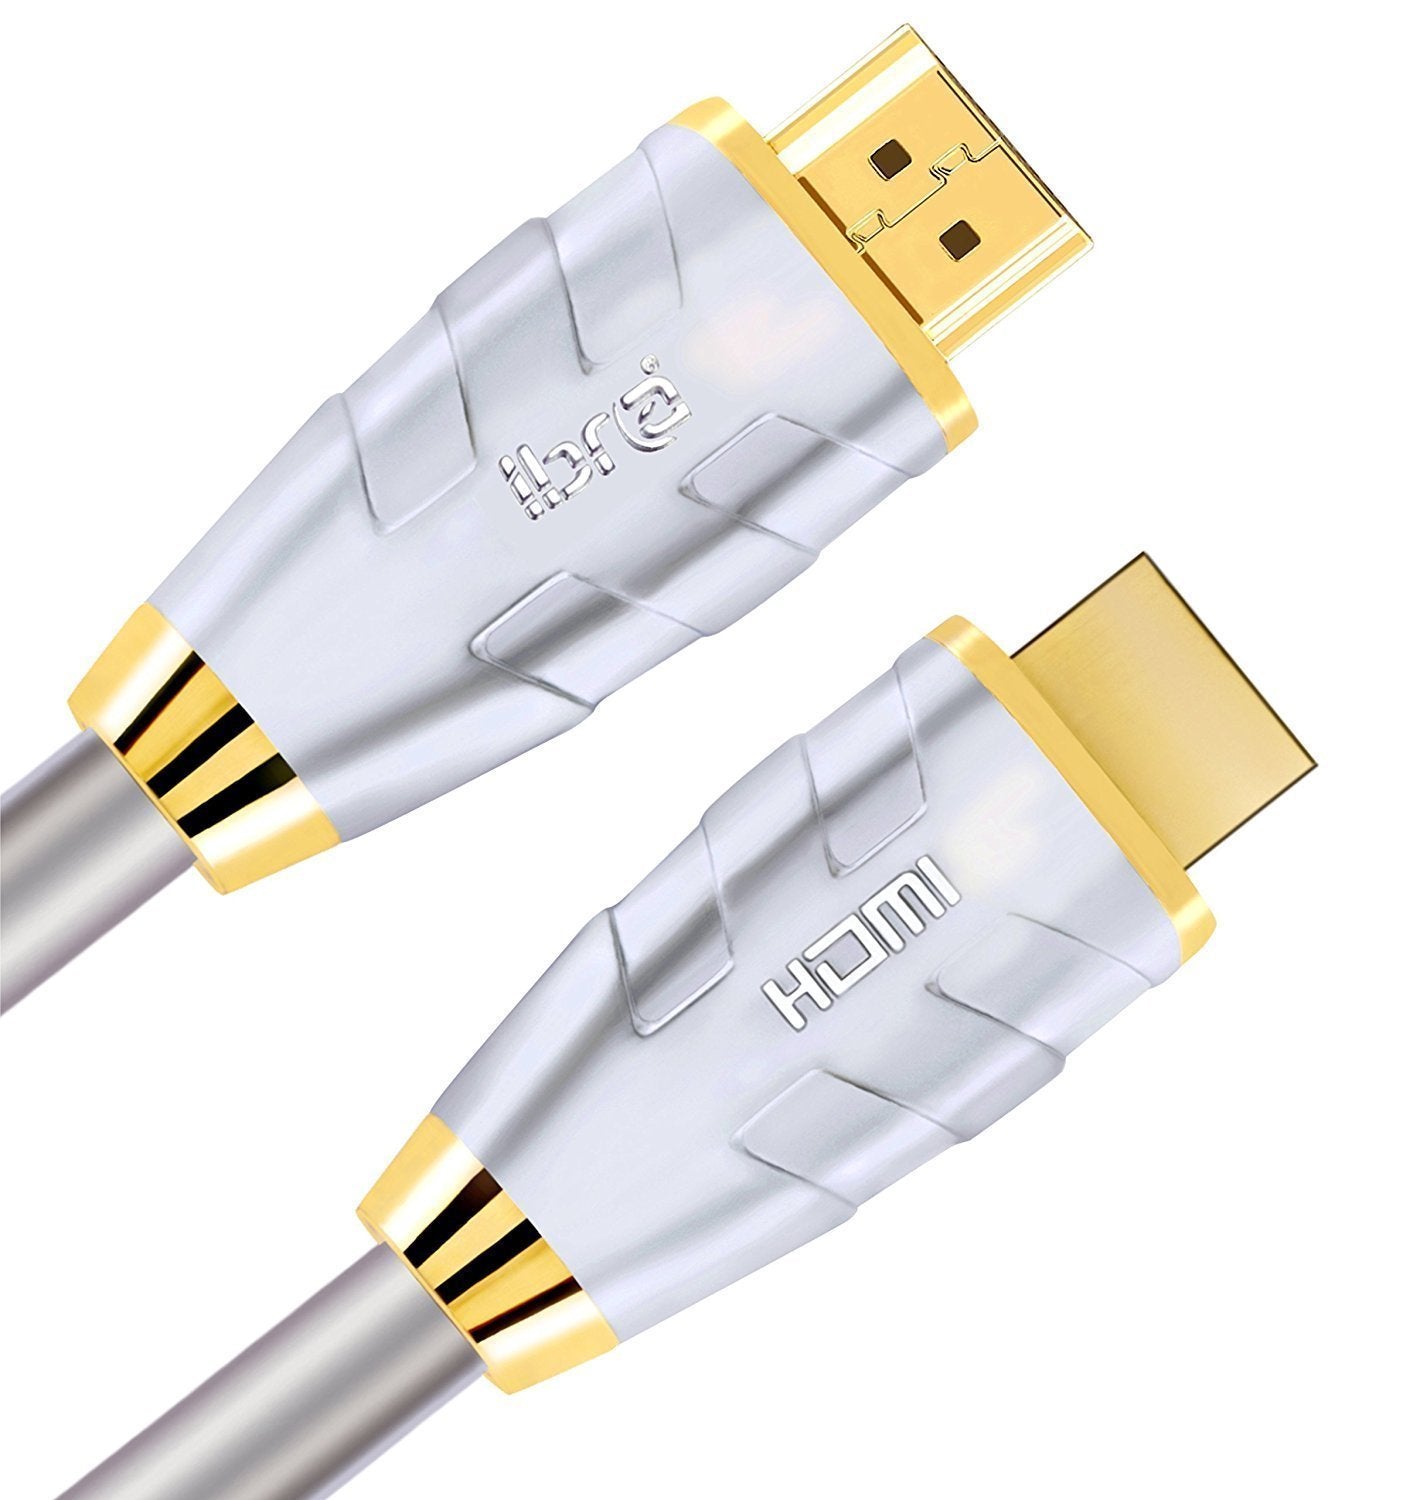 HDMI Cable 2M HDMI 2.0(4K@60Hz)-18Gbps+ -28AWG Advanced Braided Cord-Gold Plated Connectors-Ethernet,Audio Return Video 4K2160p HD1080p3D Xbox PlayStation PS3 PS4 AppleTV-IBRA Advance(Updated Version)